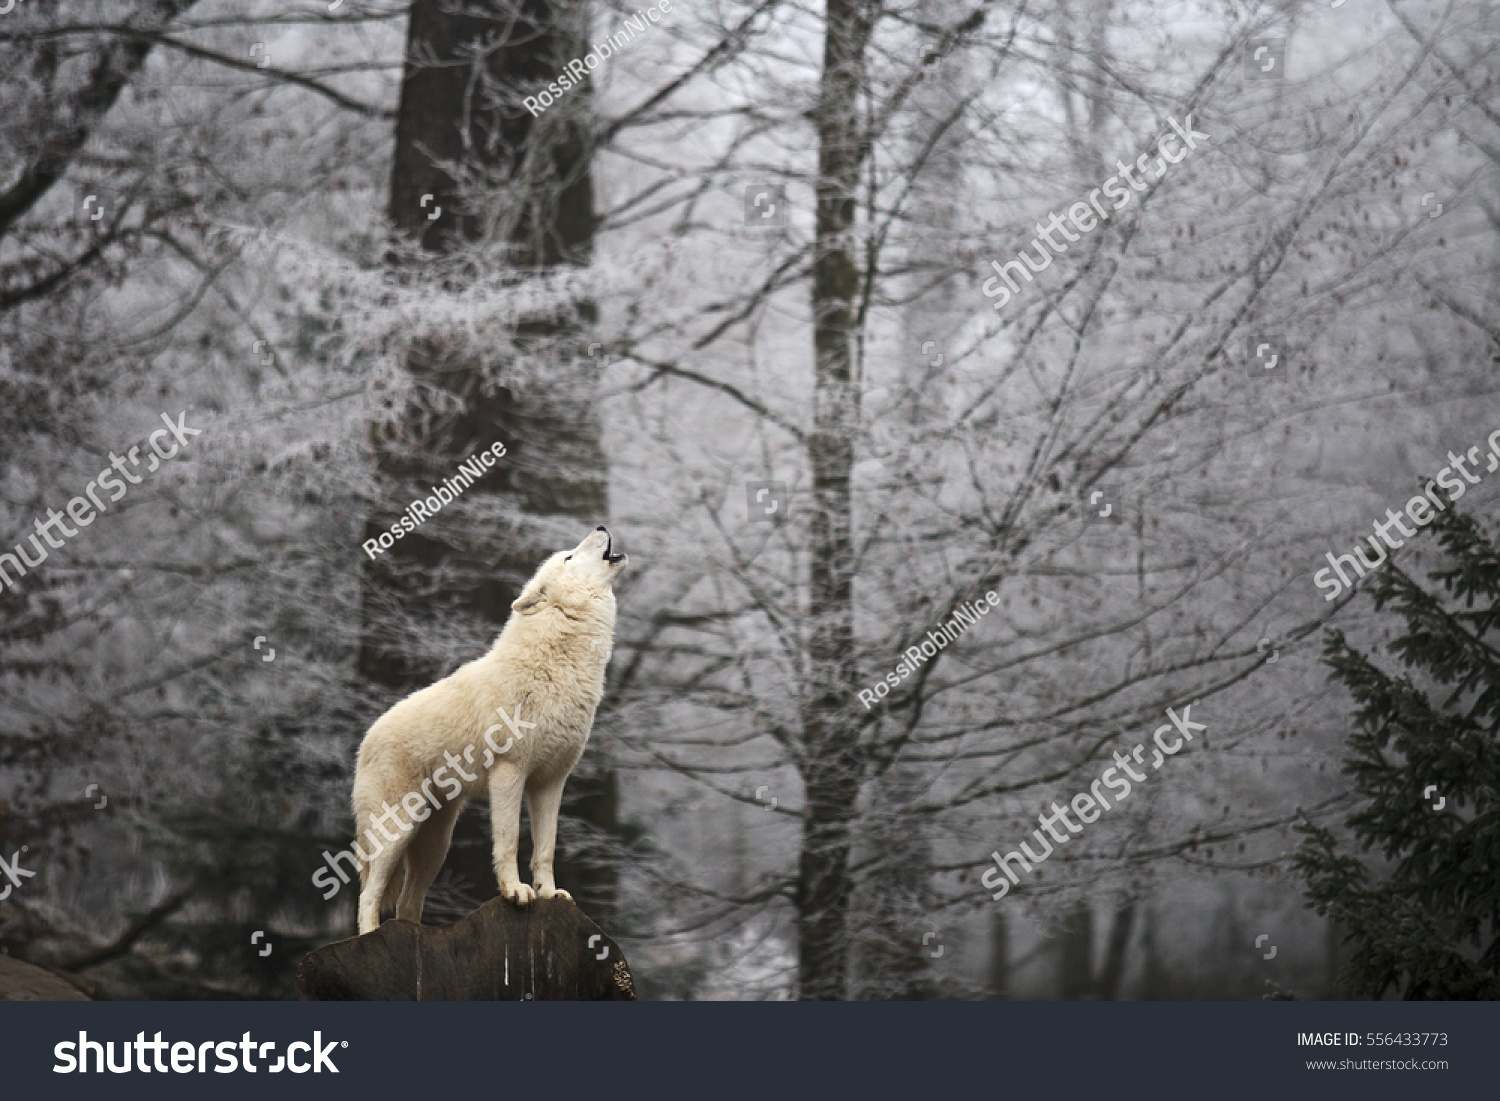 Wolf's howling in the winter forest, magic moment. Blurry background with white forest  #556433773